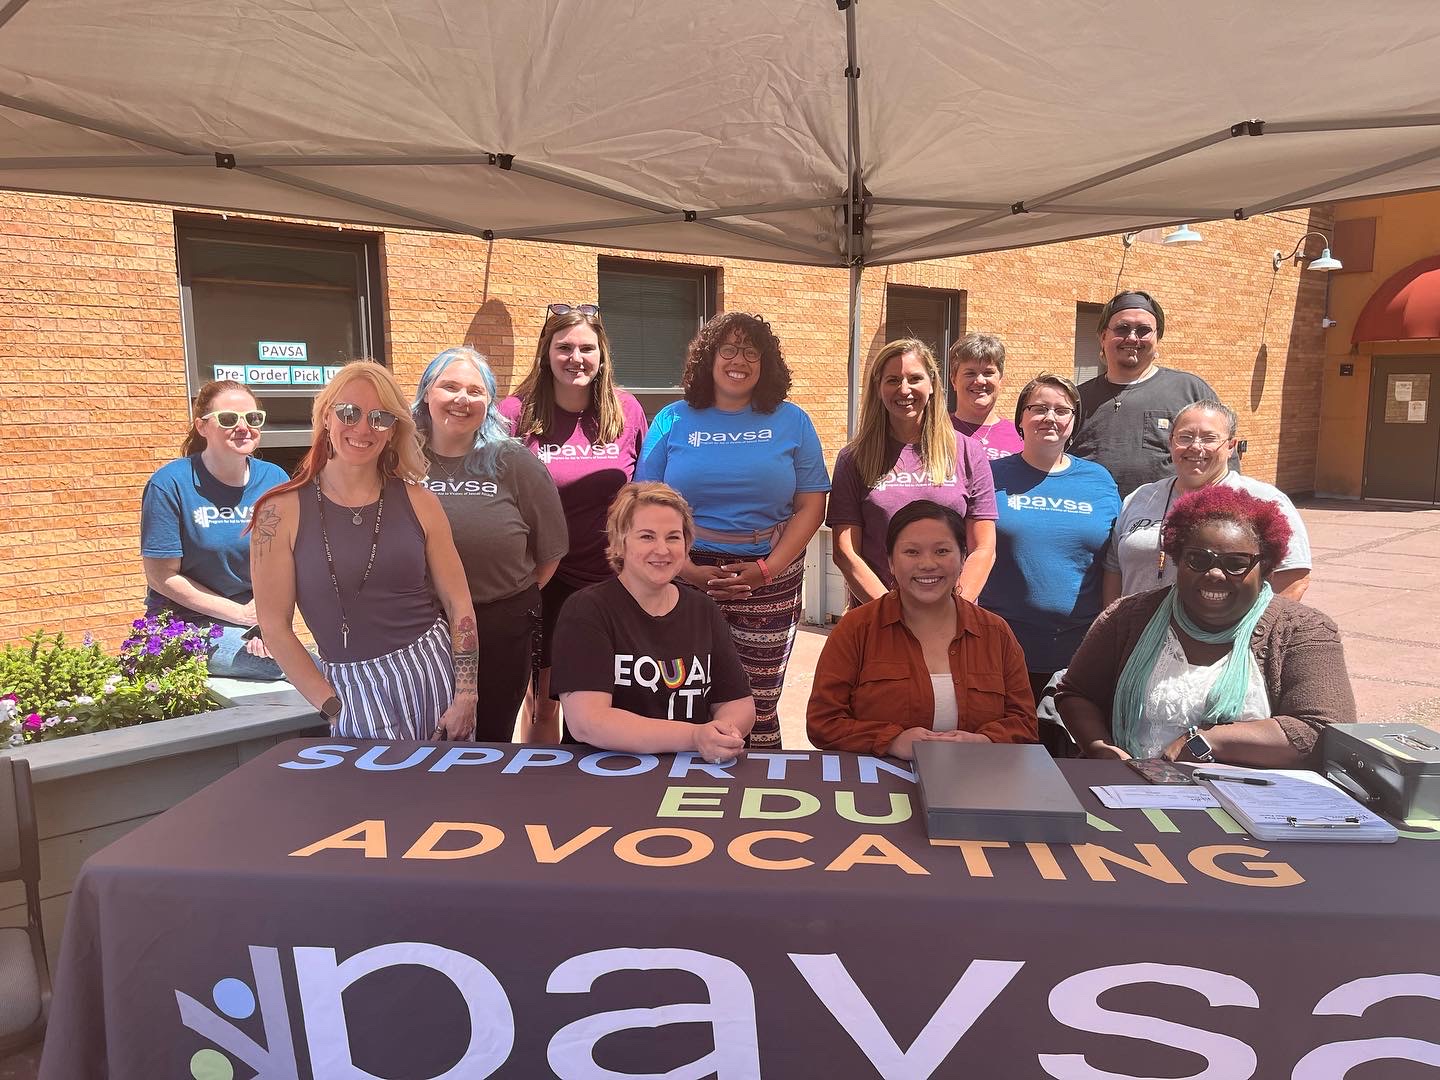 A group of people standing and sitting behind a table under a tent. The table has a sign that reads "SUPPORTING. EDUCATING. ADVOCATING." and "paysa" with a flower logo. The people are smiling and wearing various "paysa" t-shirts. The background shows a brick building.